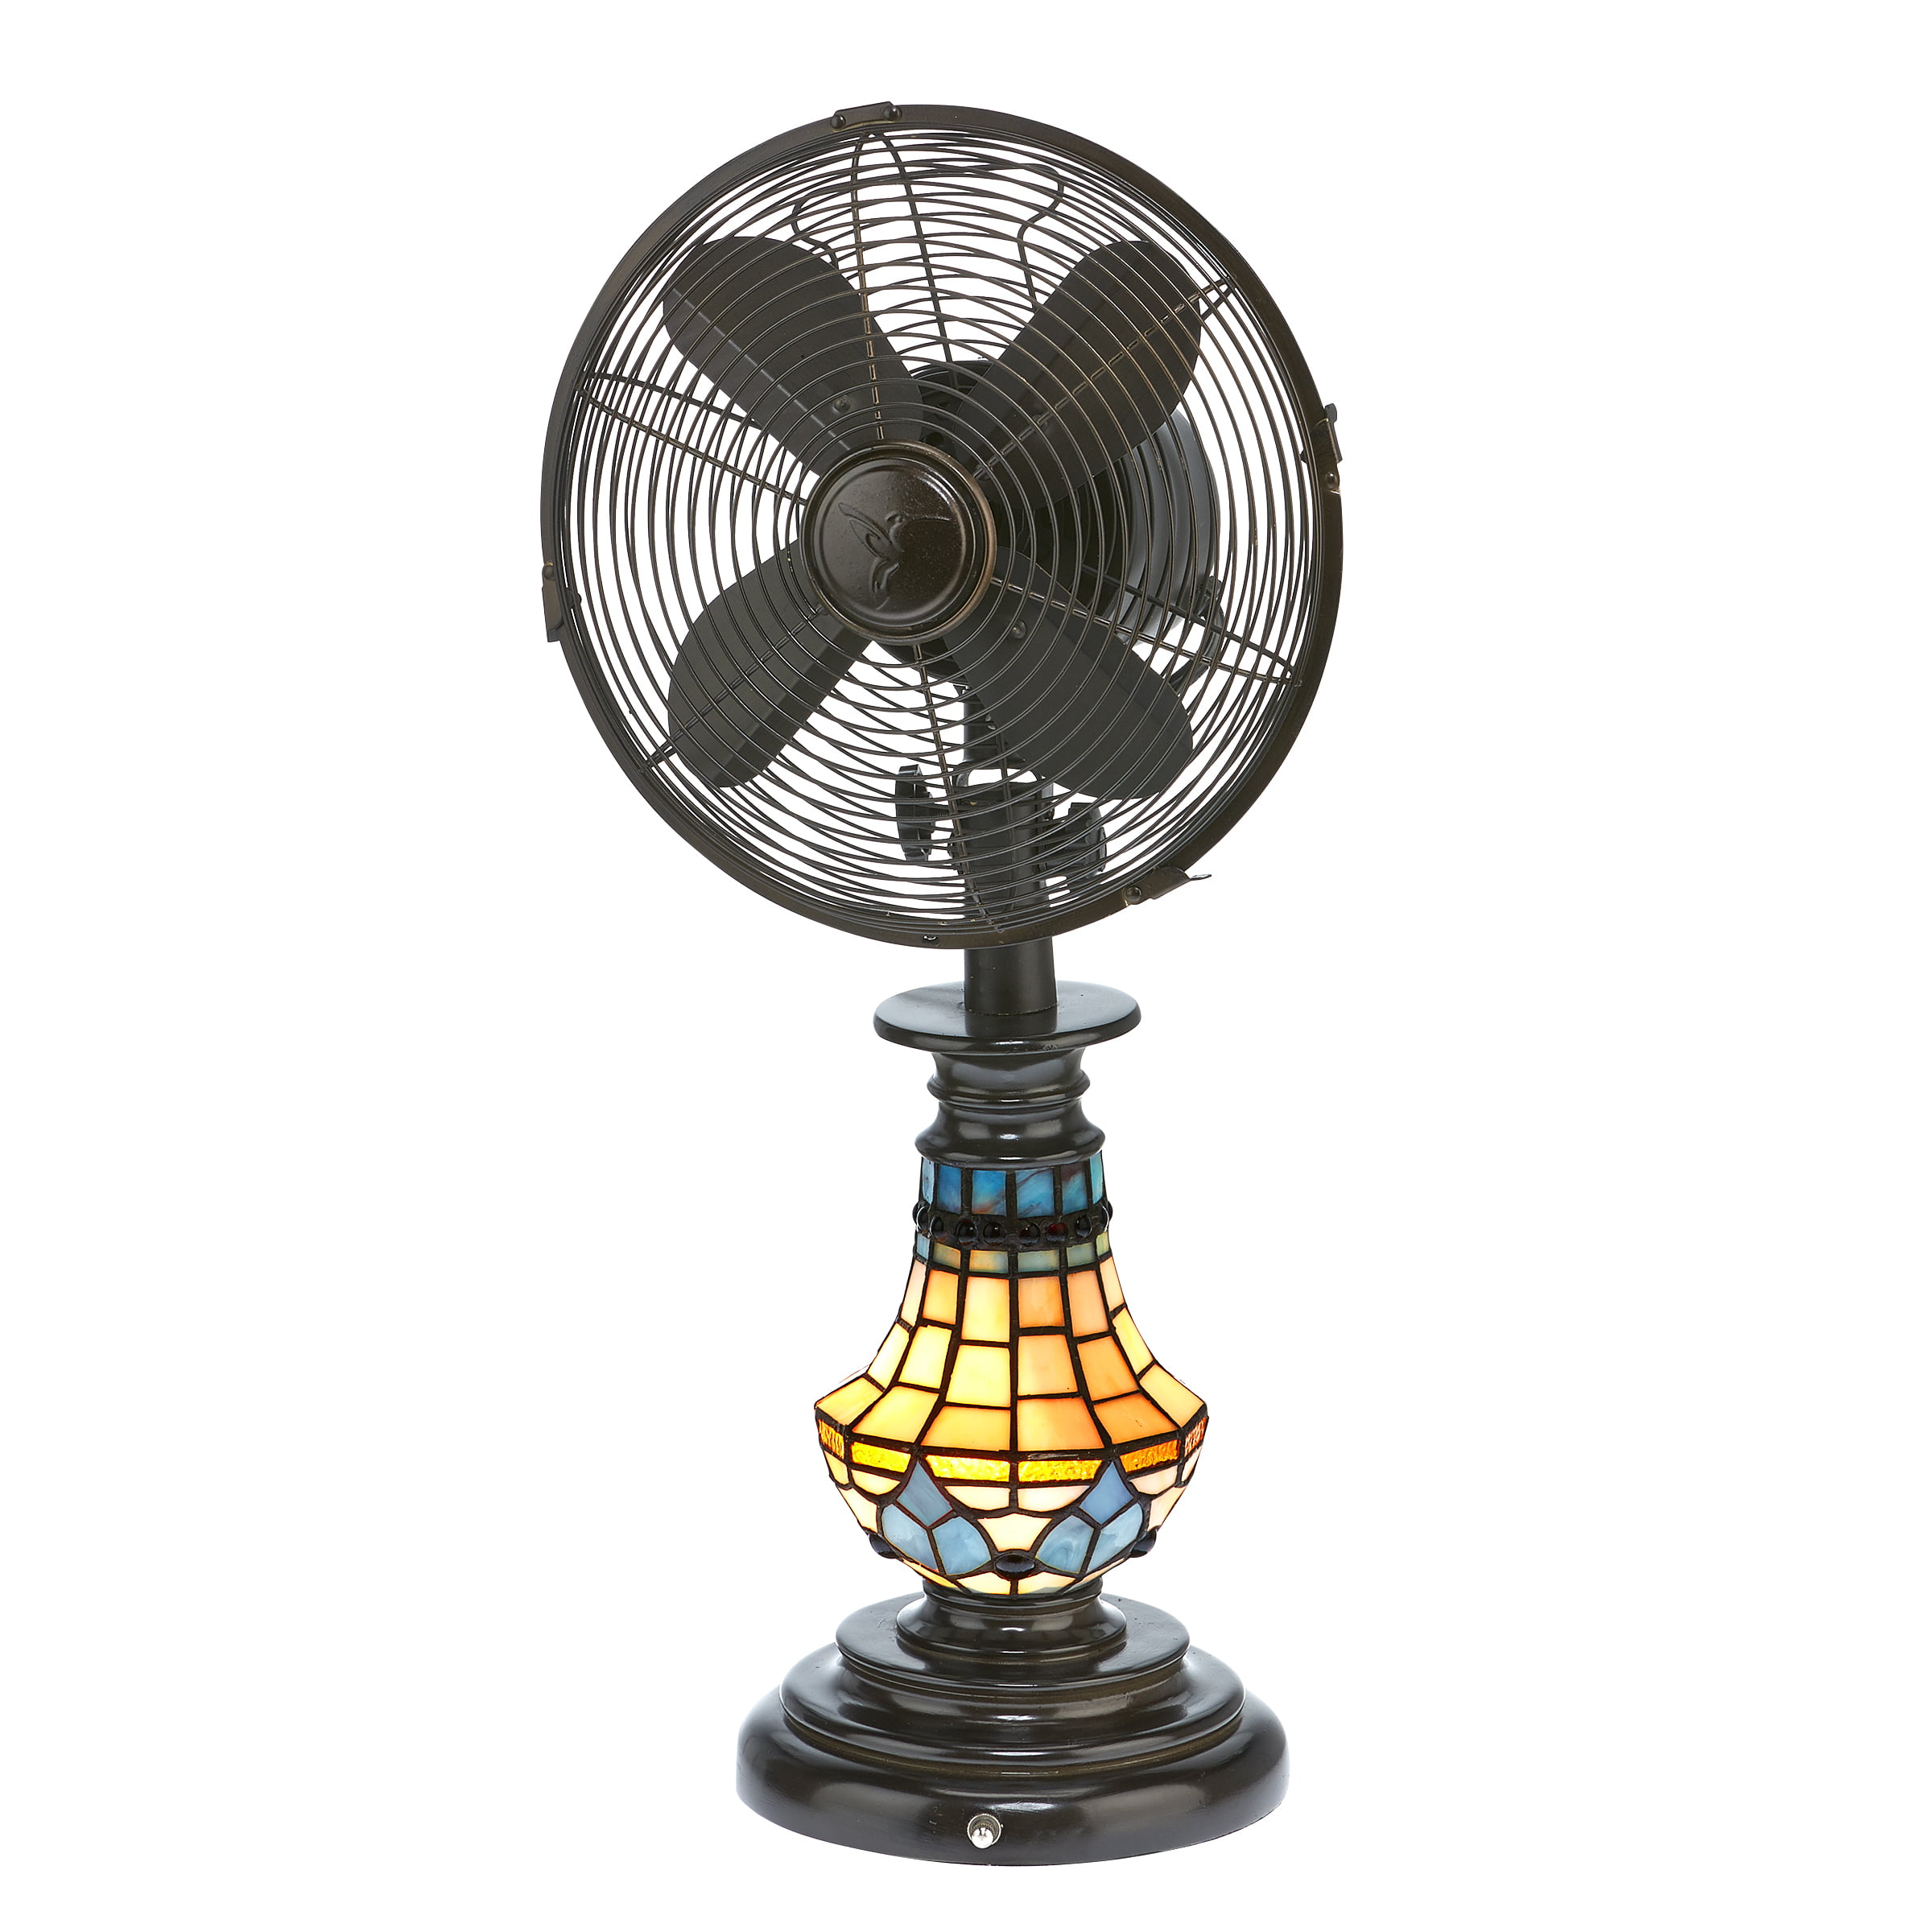 Decobreeze Oscillating Table Fan And, Vintage Fan Table Lamp